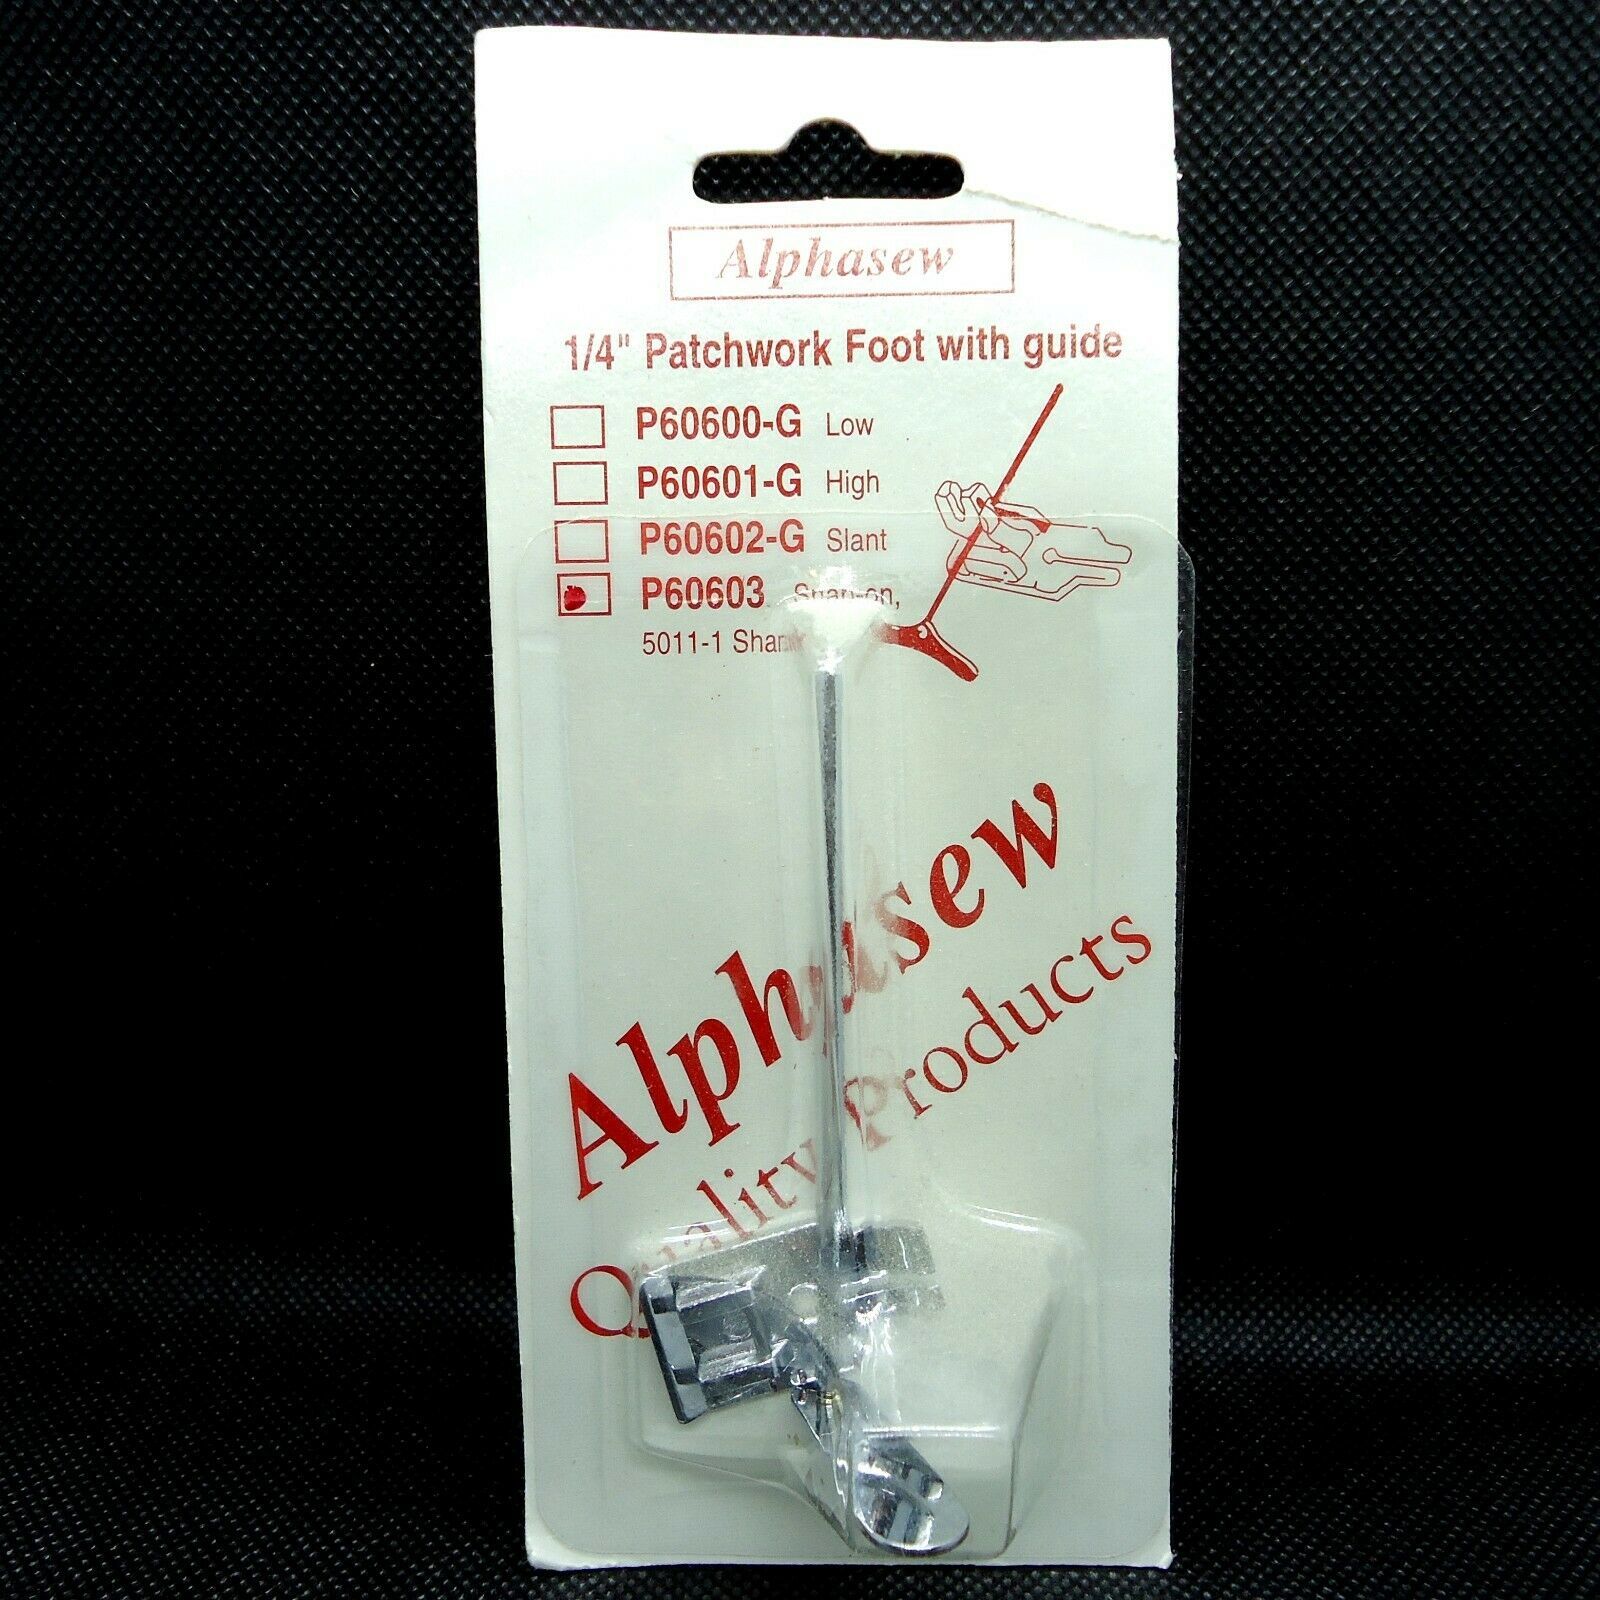 Snap-On 1/4" Patchwork Foot with Guide #P60603 5011-1 Shank Alphasew Fashion - $12.19